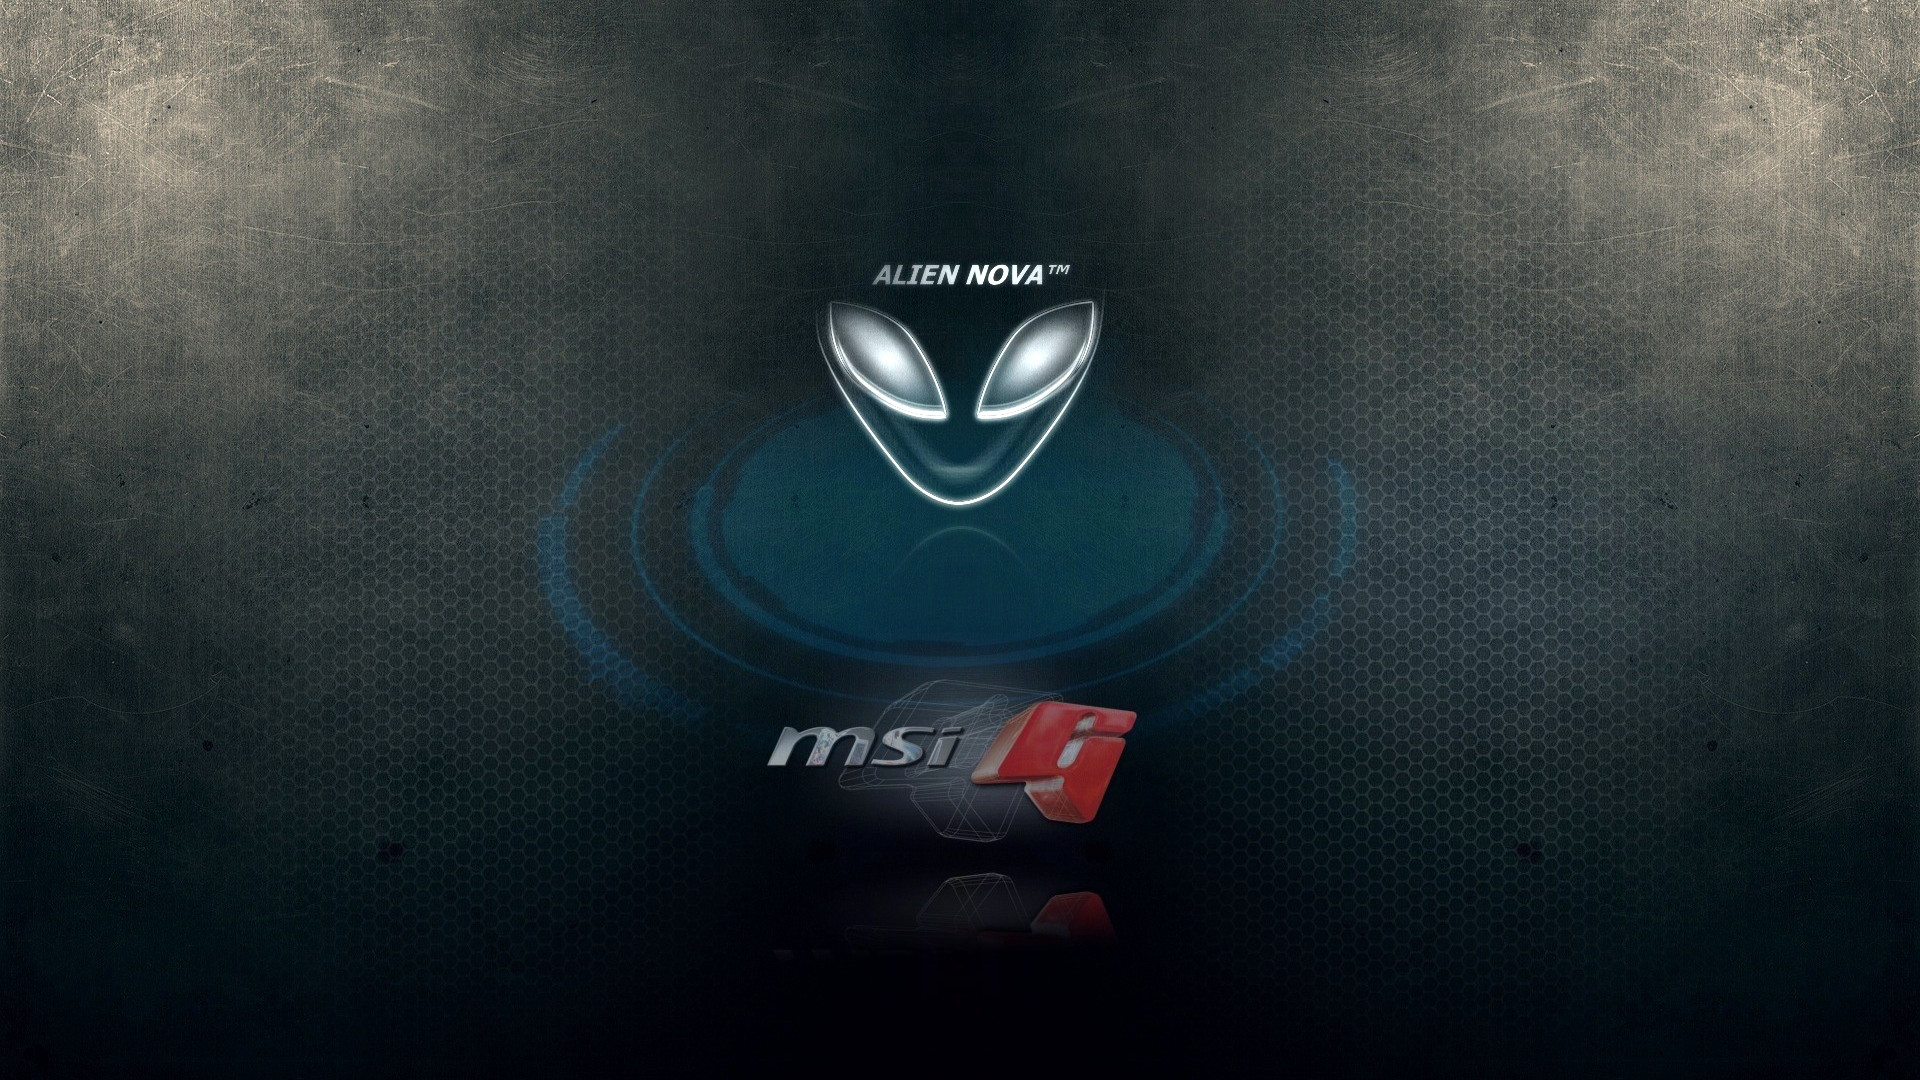 1920x1080 alienware and MSi g logo hd  1080p wallpaper. compatible for .